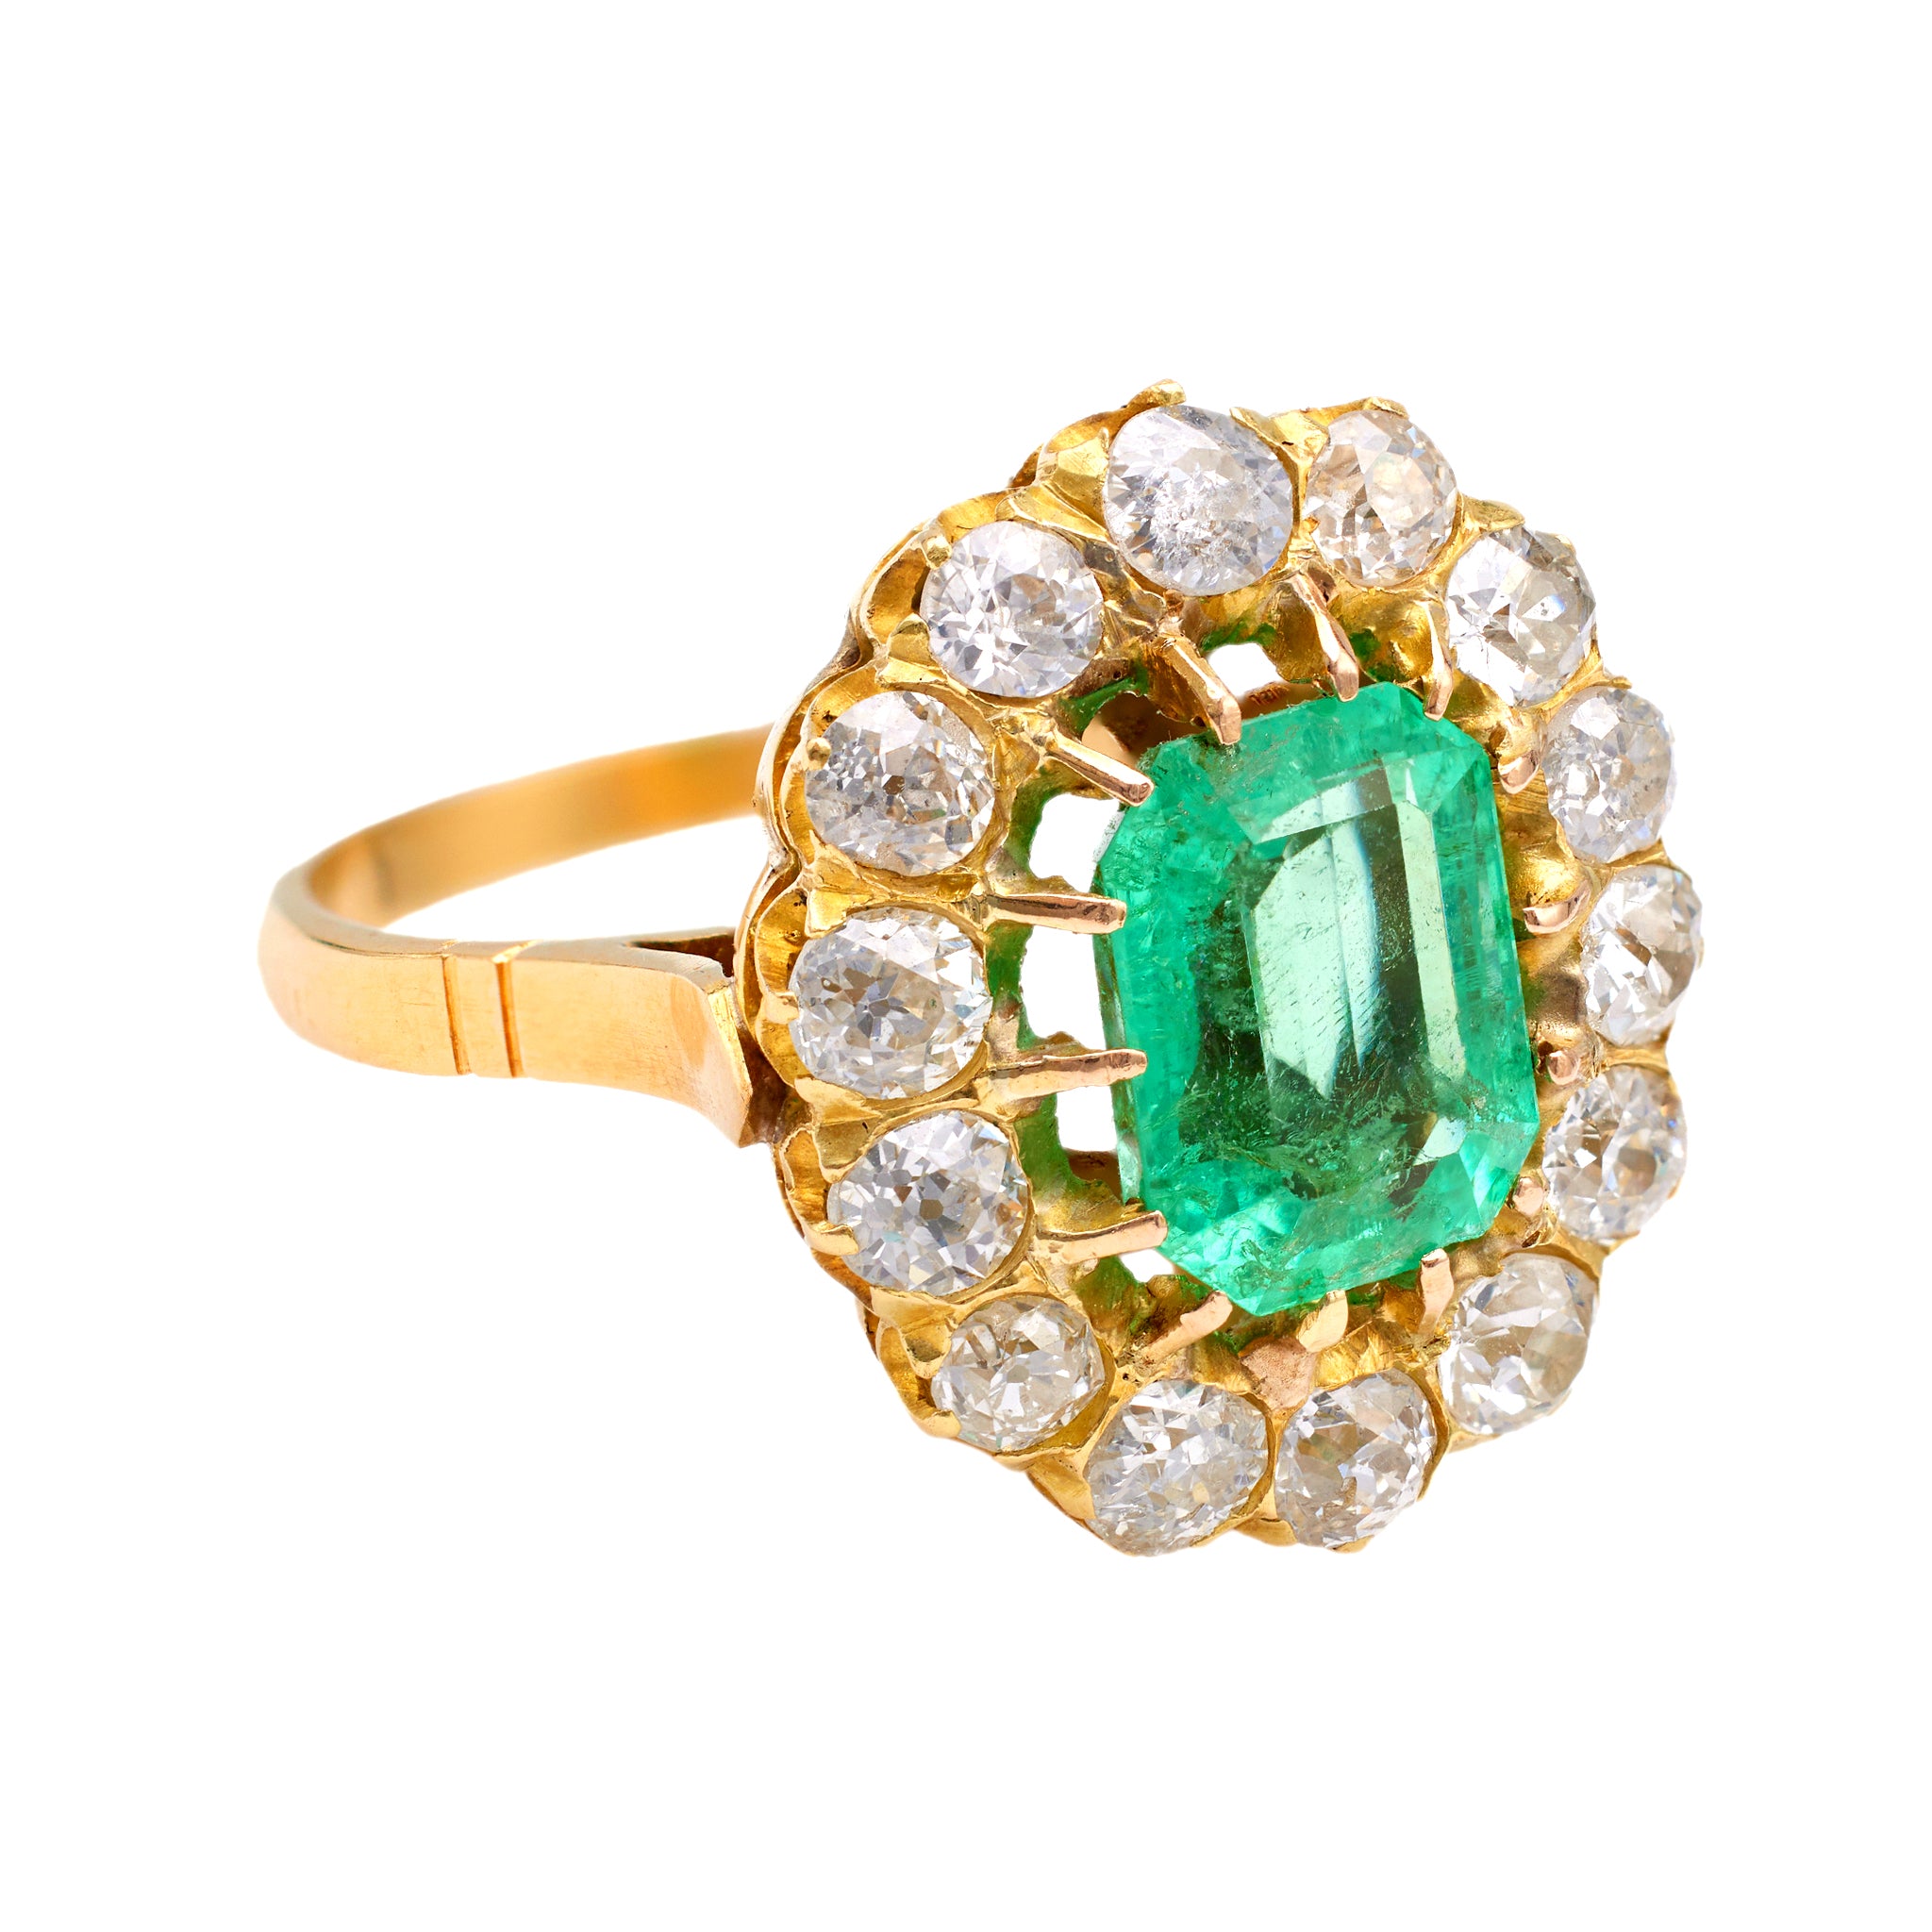 Victorian Revival GIA 2.50 Carat Colombian Emerald Diamond 18k Yellow Gold Cluster Ring Rings Jack Weir & Sons   